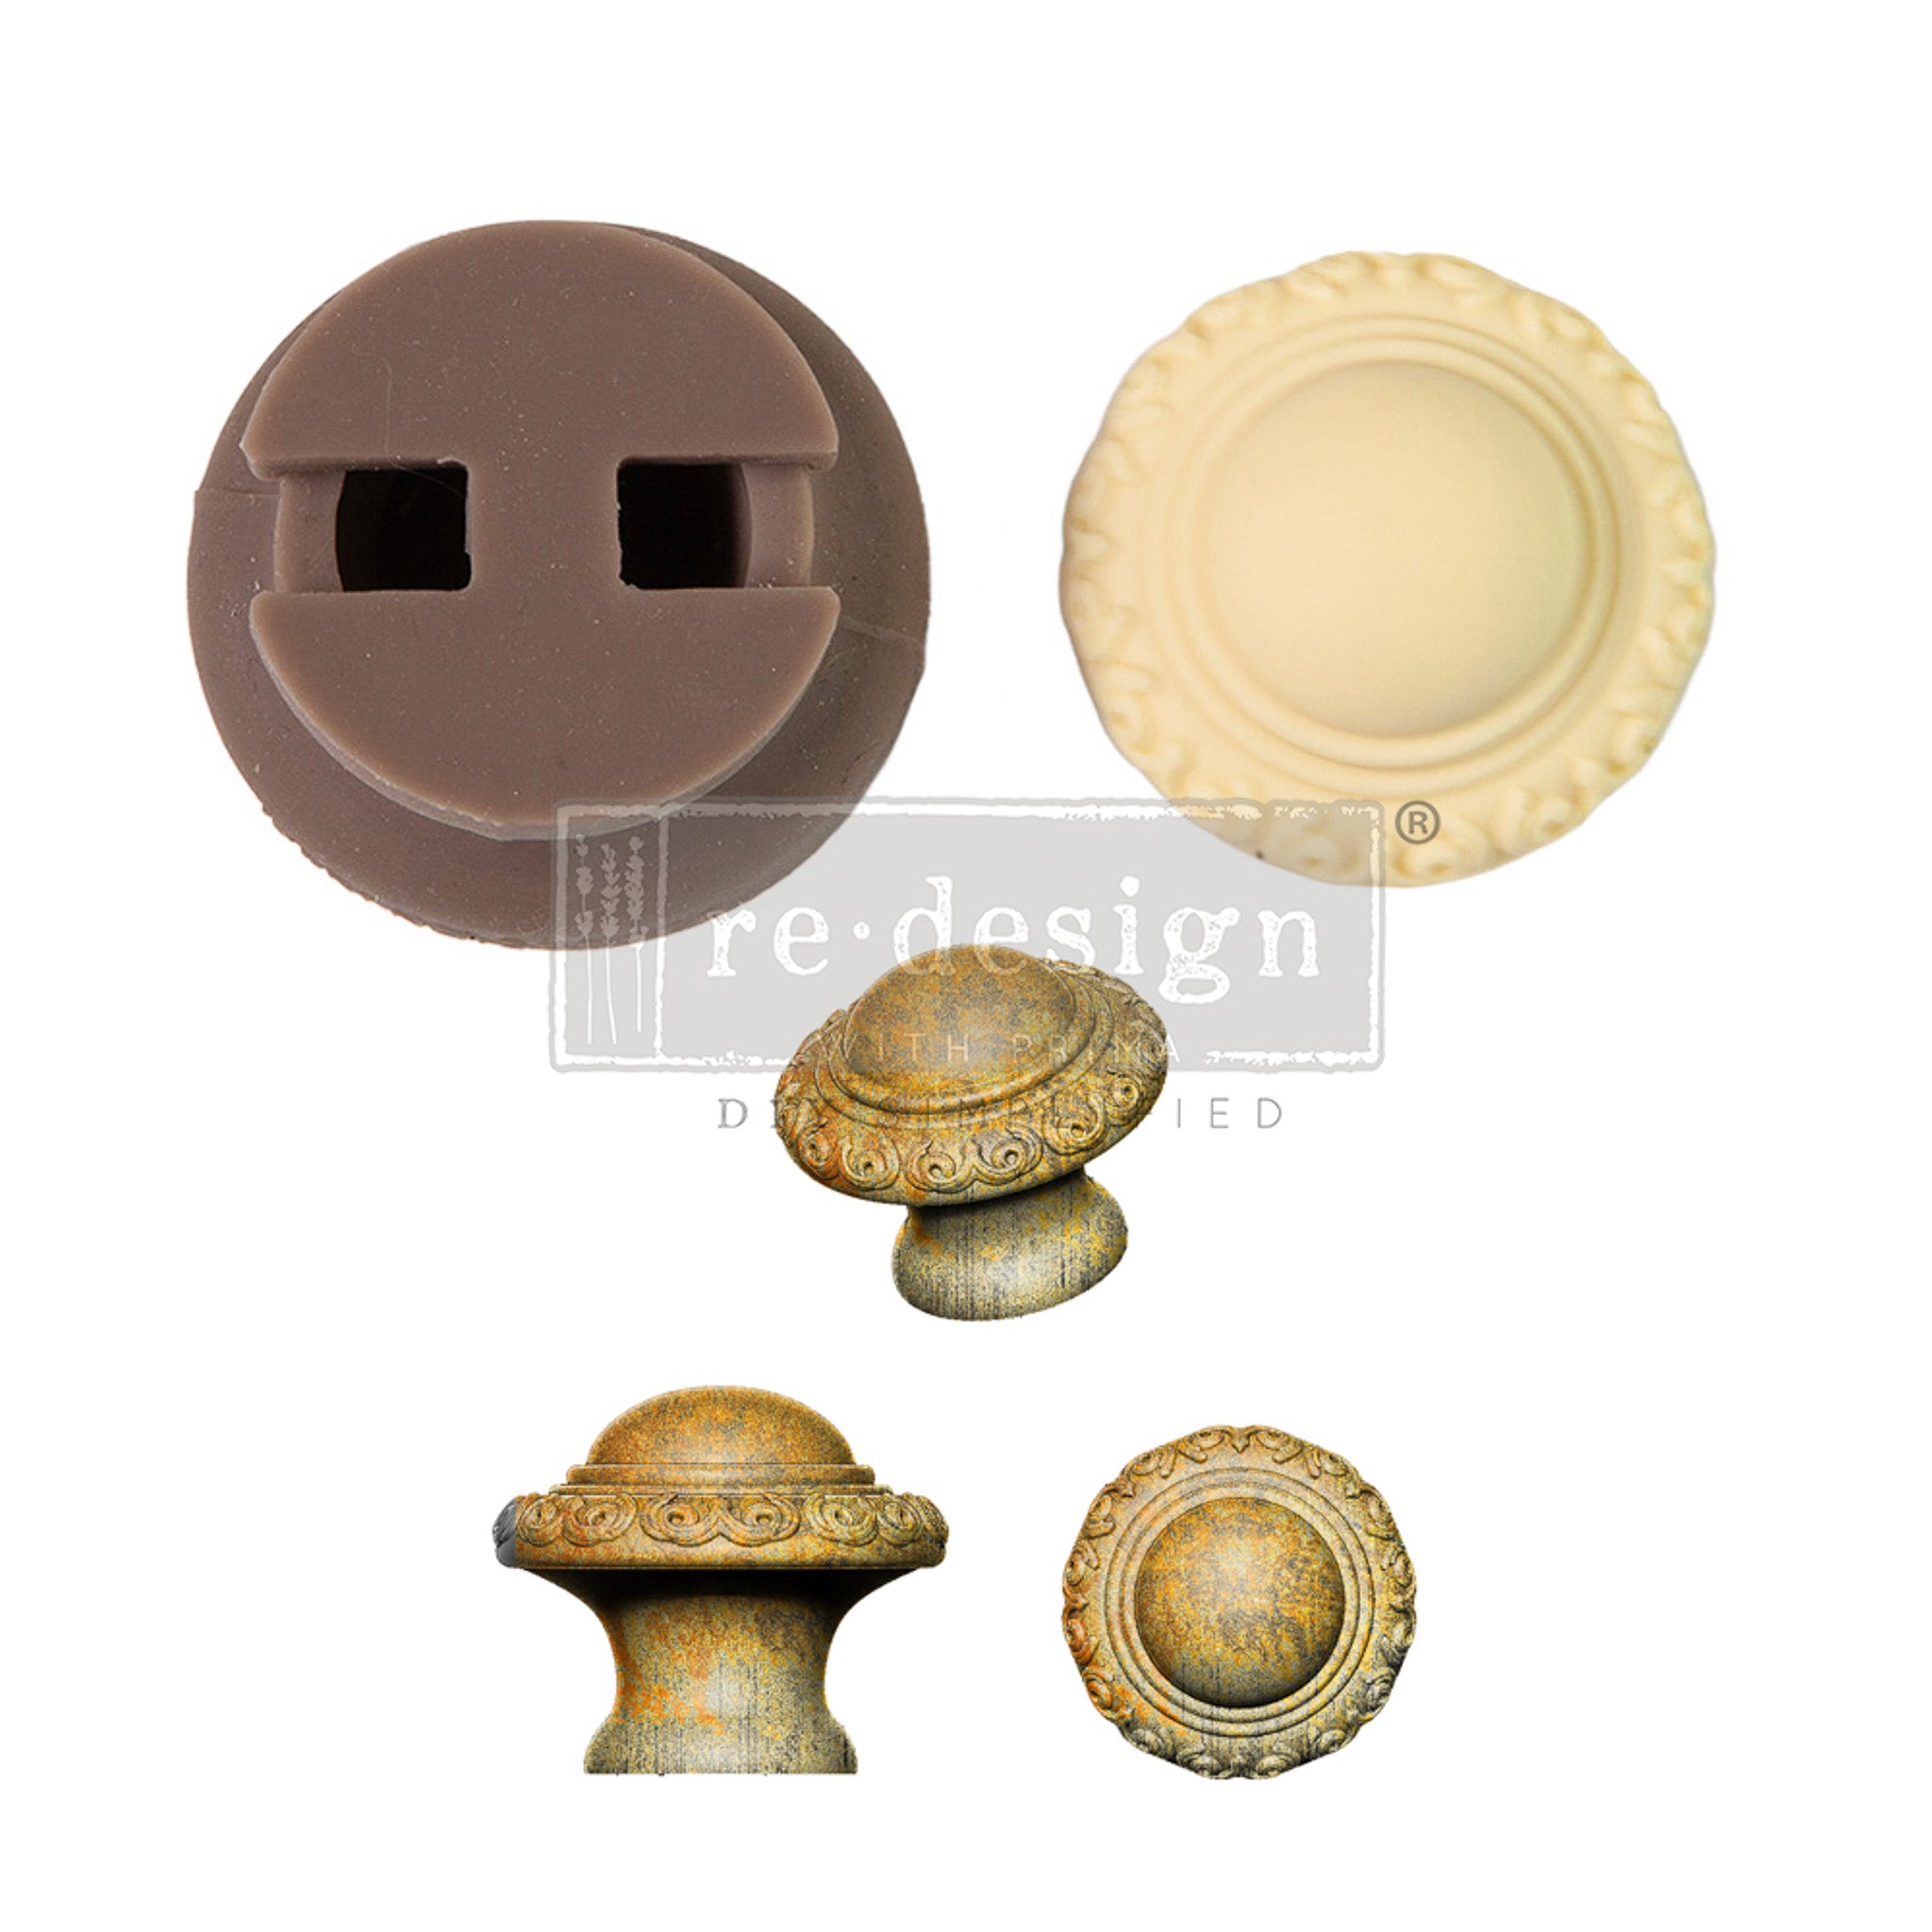 A brown silicone mold, cream-colored resin casting, and 3 views of gold-colored castings of a drawer knob with an ornate border are against a white background.